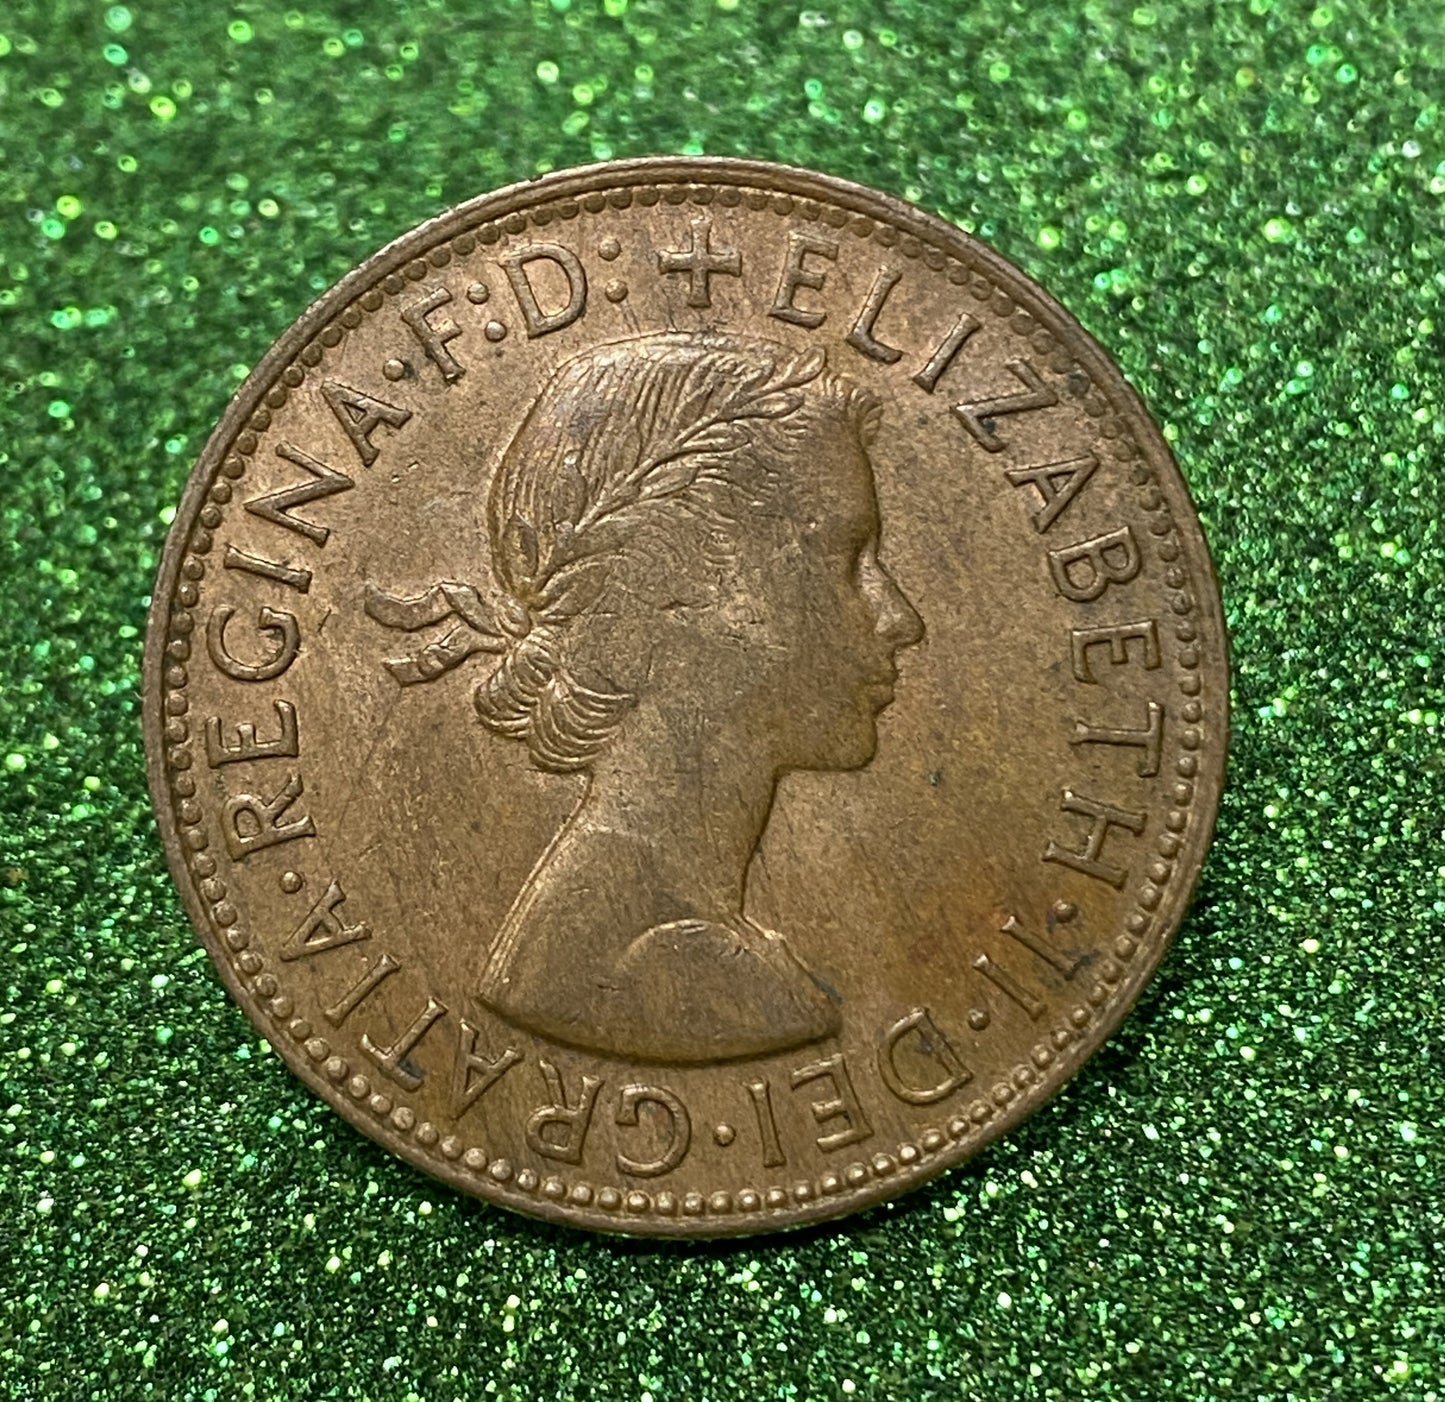 Australian 1 Cent LARGE PENNY COIN 1962 Queen Elizabeth VG/F CONDITION